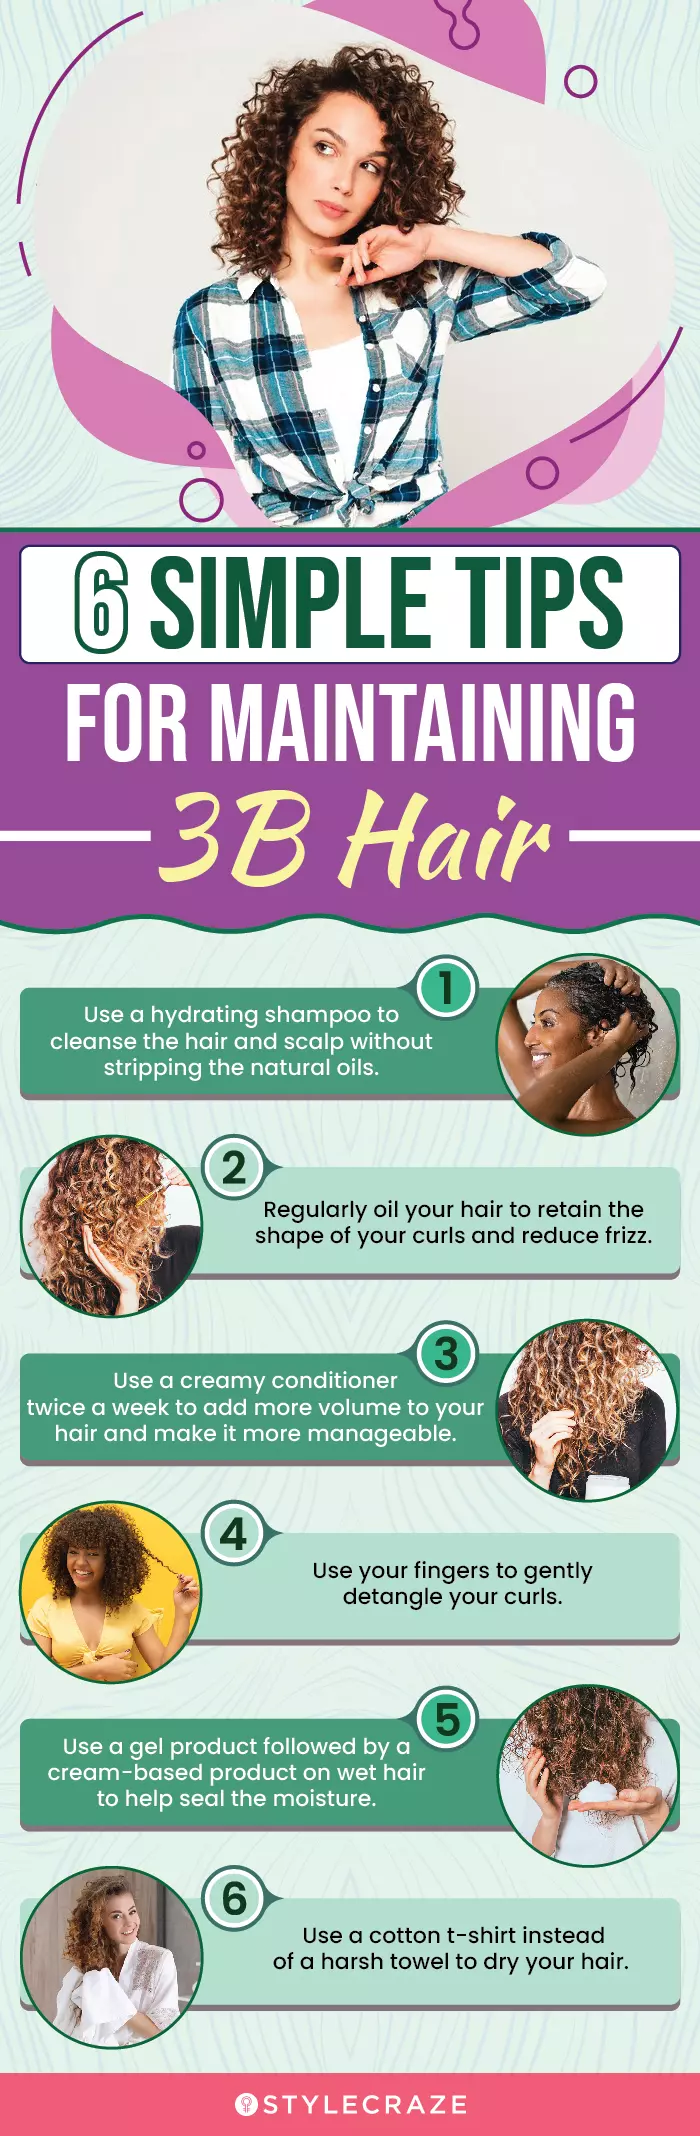 6 simple tips for maintaining 3b hair (infographic)